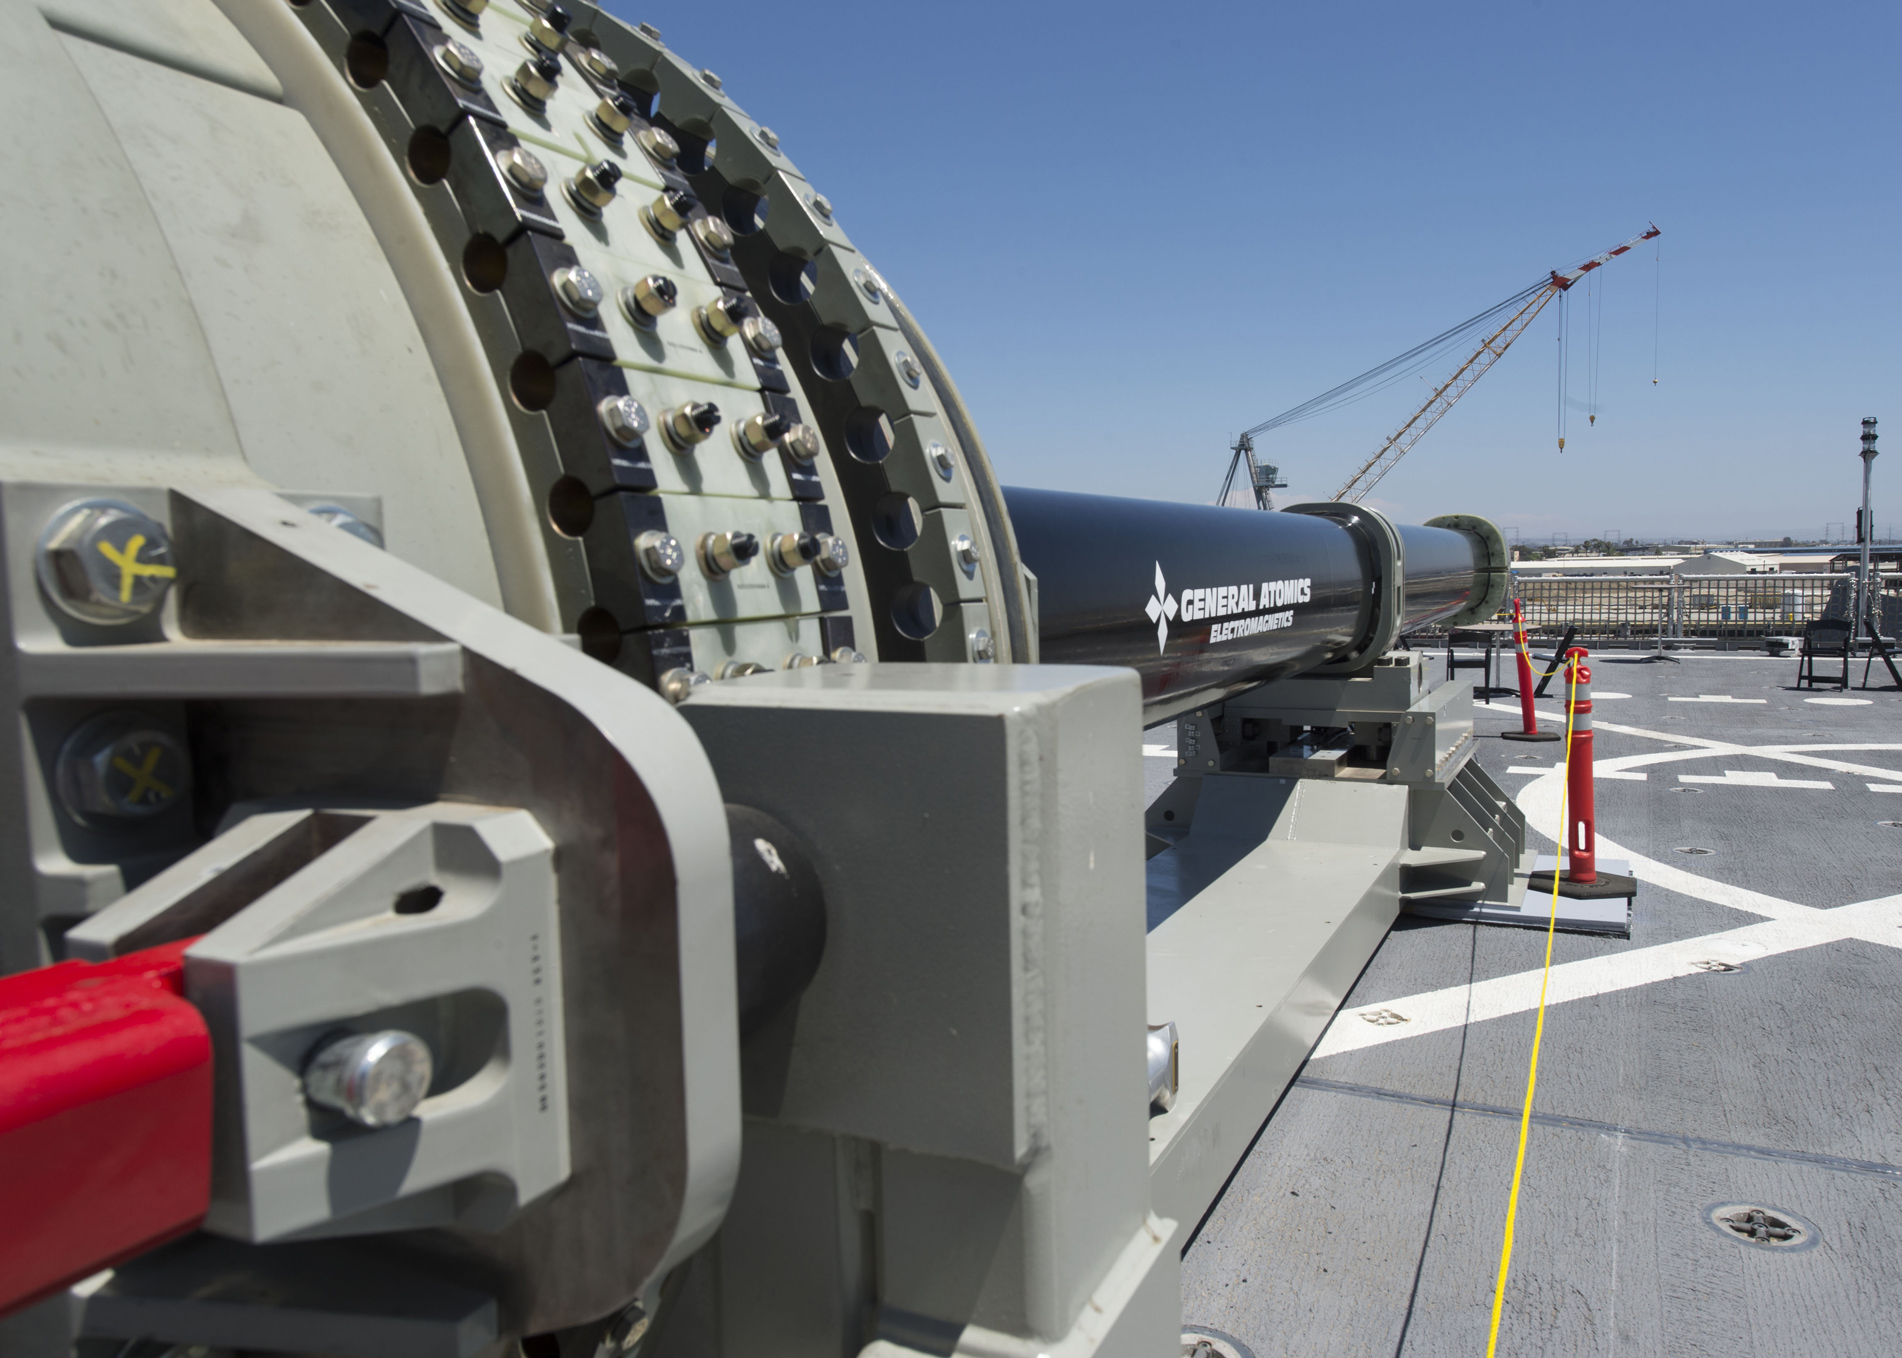 Researchers at MSU’s Center for Vehicular Systems are designing control systems that will allow an all-electric Naval ship to transfer power to advanced weapons systems such as the Navy’s electromagnetic railgun, pictured on display aboard the USS Millinocket in port at Naval Base San Diego. (U.S. Navy Photo by Mass Communication Specialist 2nd Class Kristopher Kirsop/Released). 